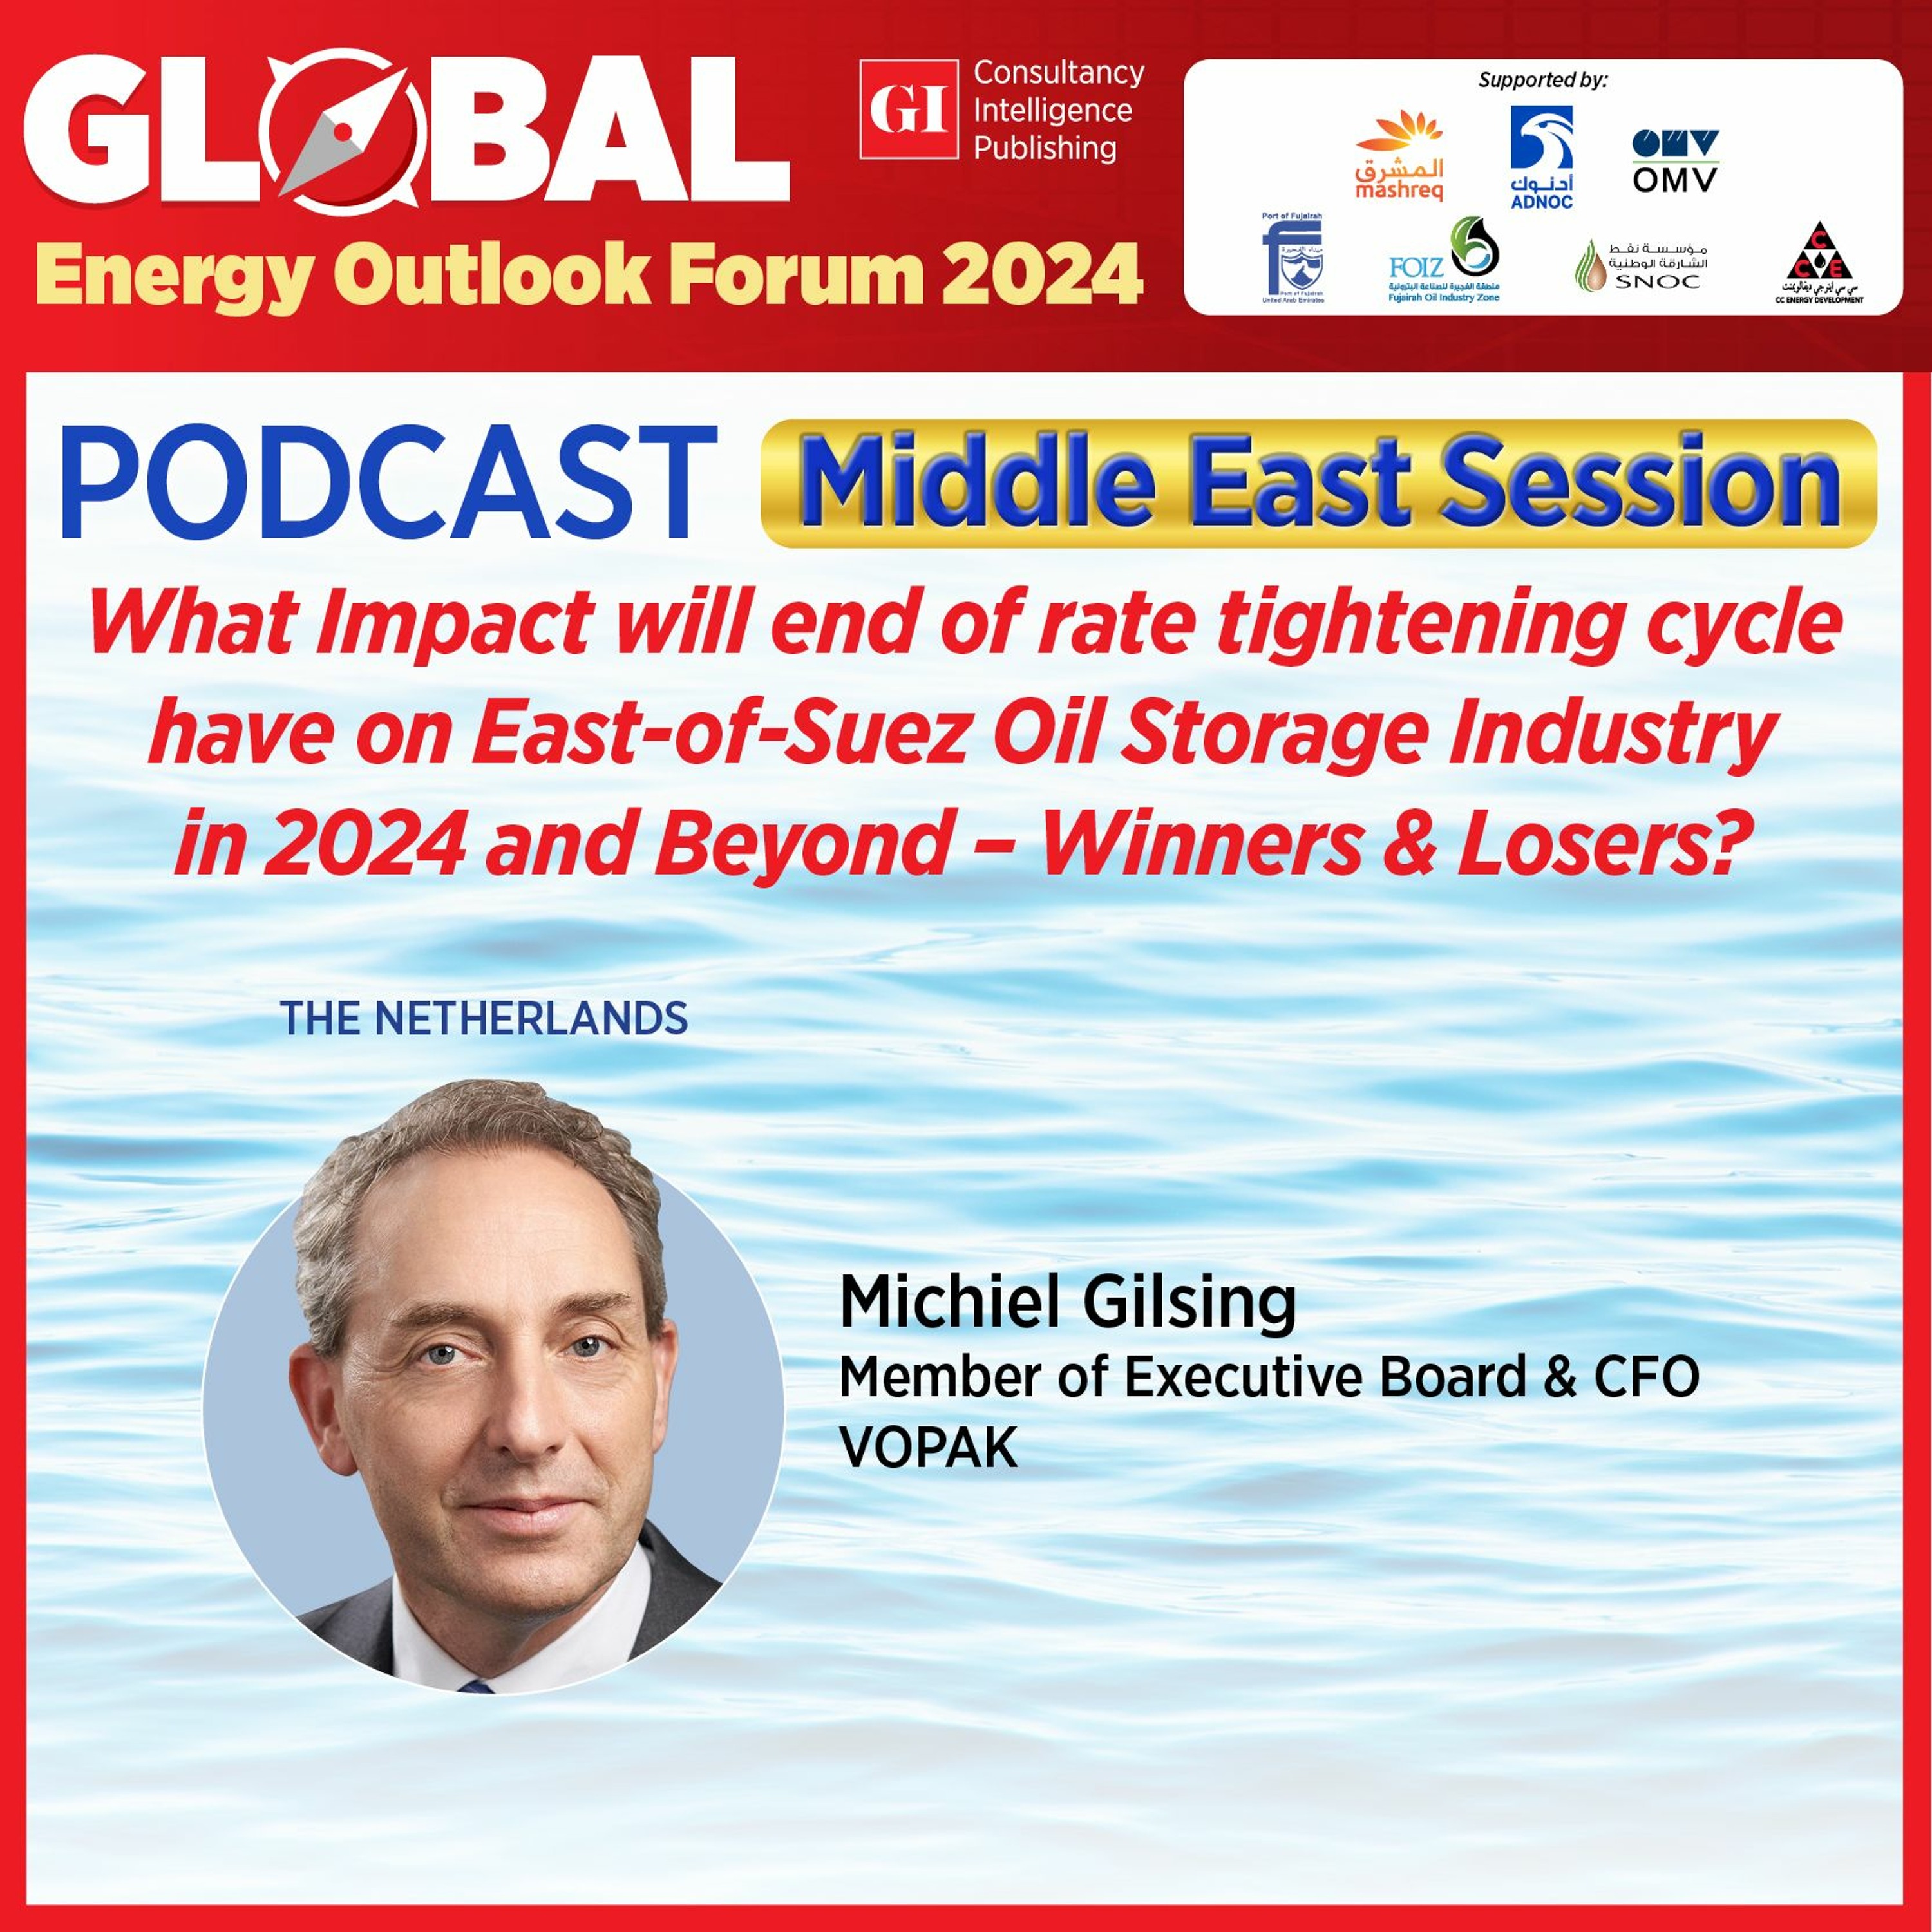 The 14th Global Energy Outlook Forum 2024: INTERVIEW